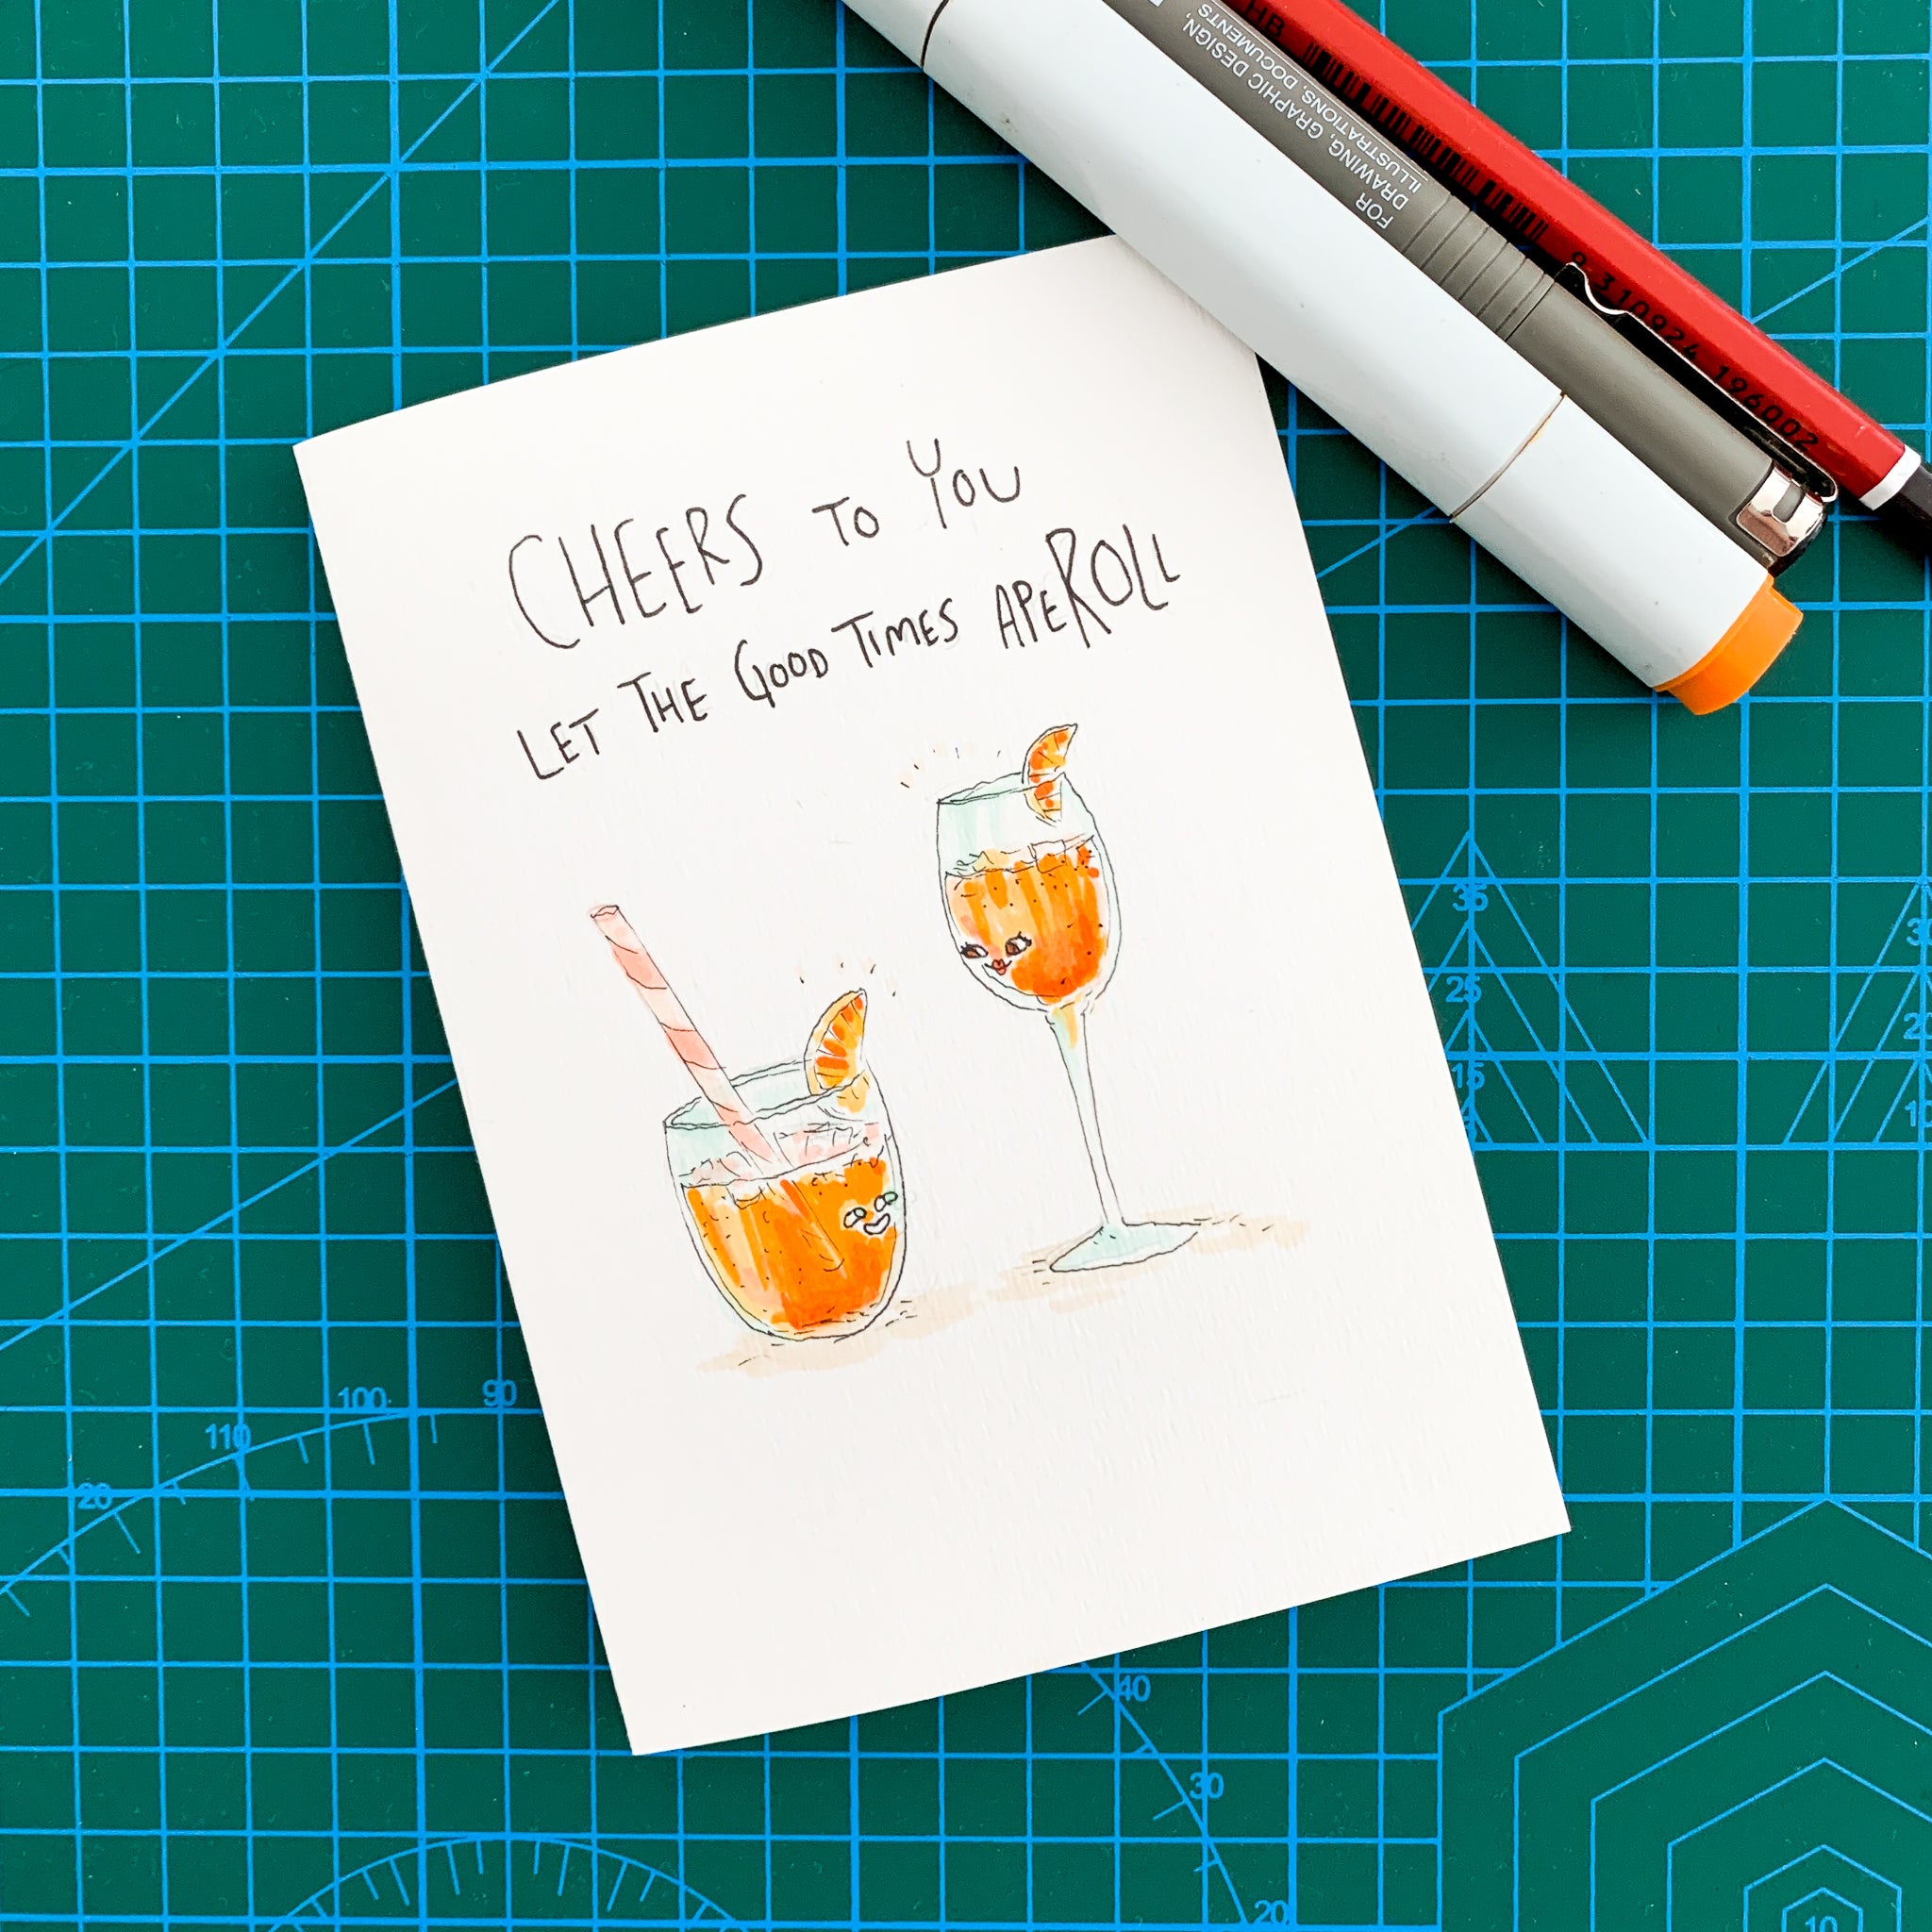 Cheers To You, Let The Good Times Aperoll - Well Drawn